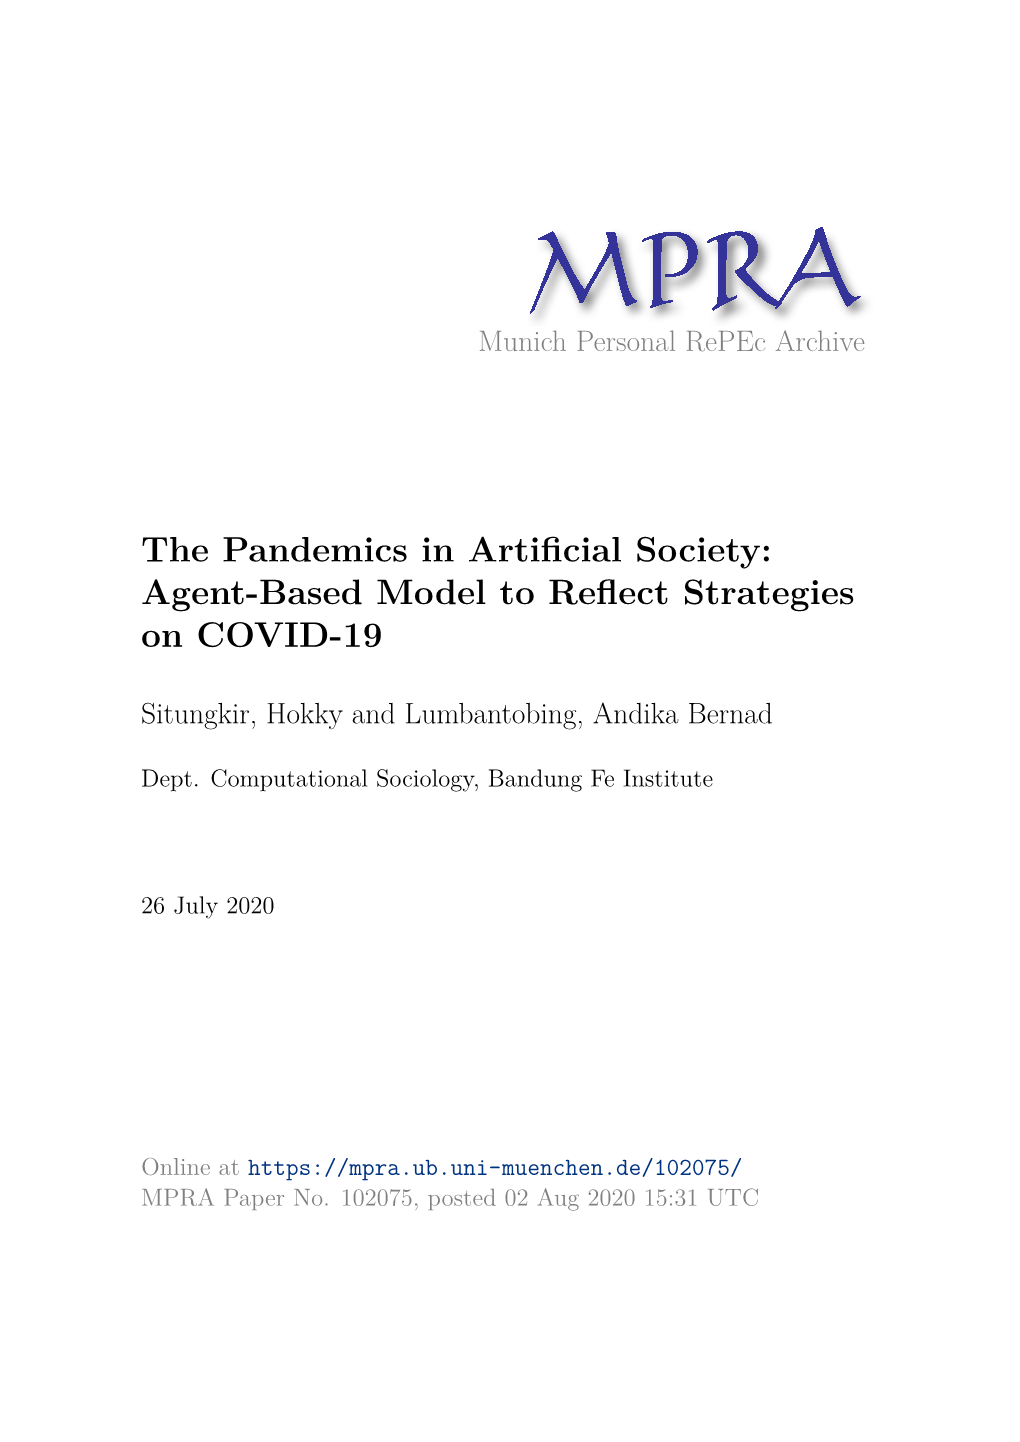 The Pandemics in Artificial Society: Agent-Based Model to Reflect